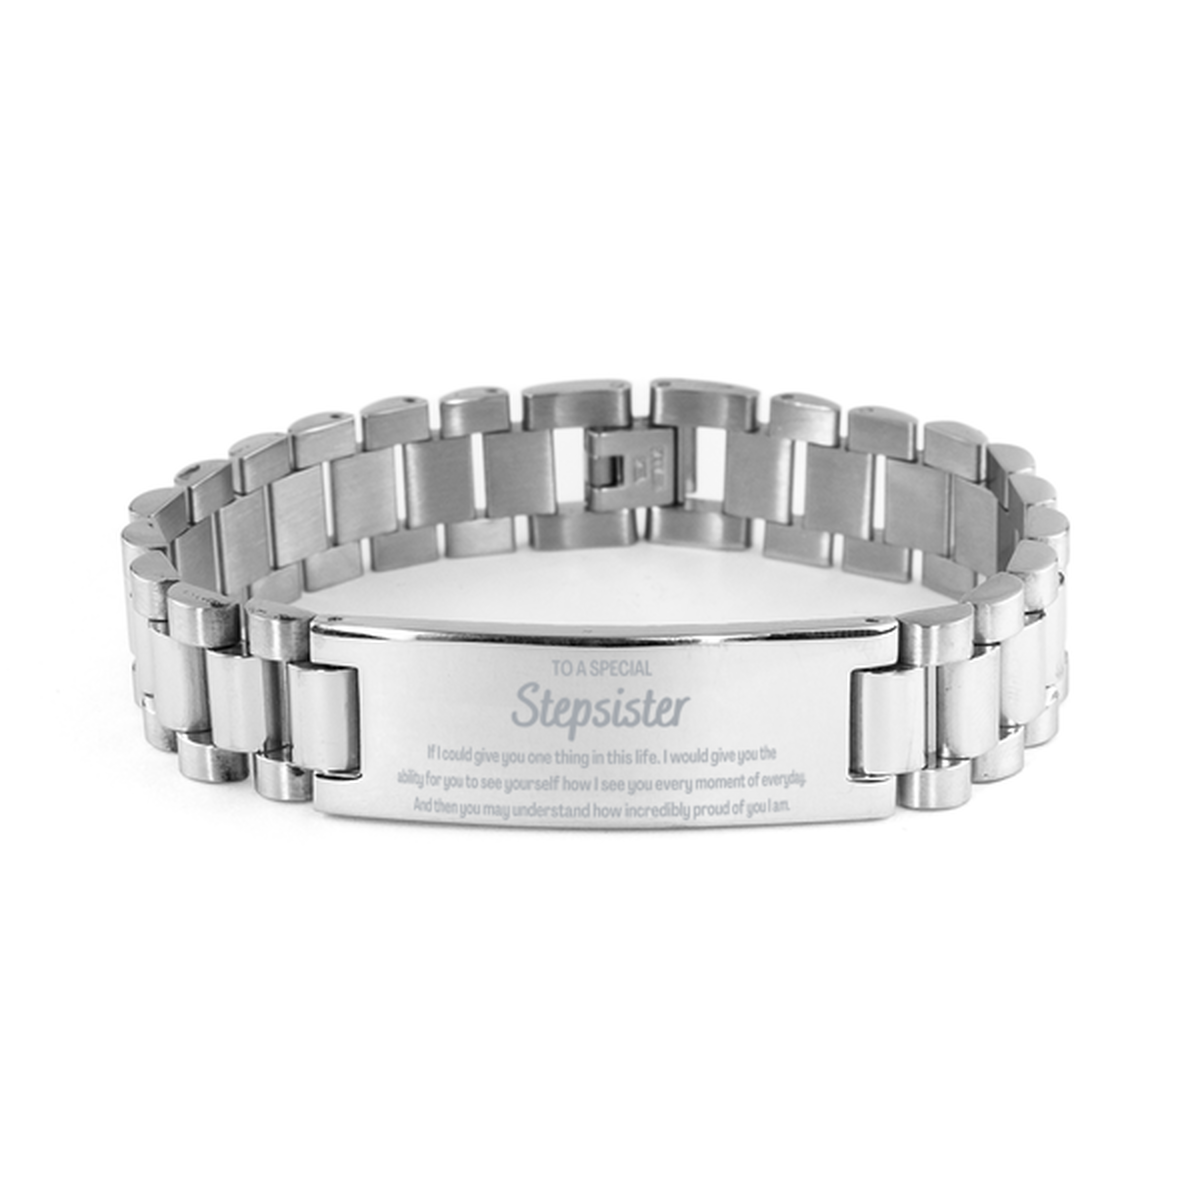 To My Stepsister Ladder Stainless Steel Bracelet, Gifts For Stepsister Engraved, Inspirational Gifts for Christmas Birthday, Epic Gifts for Stepsister To A Special Stepsister how incredibly proud of you I am